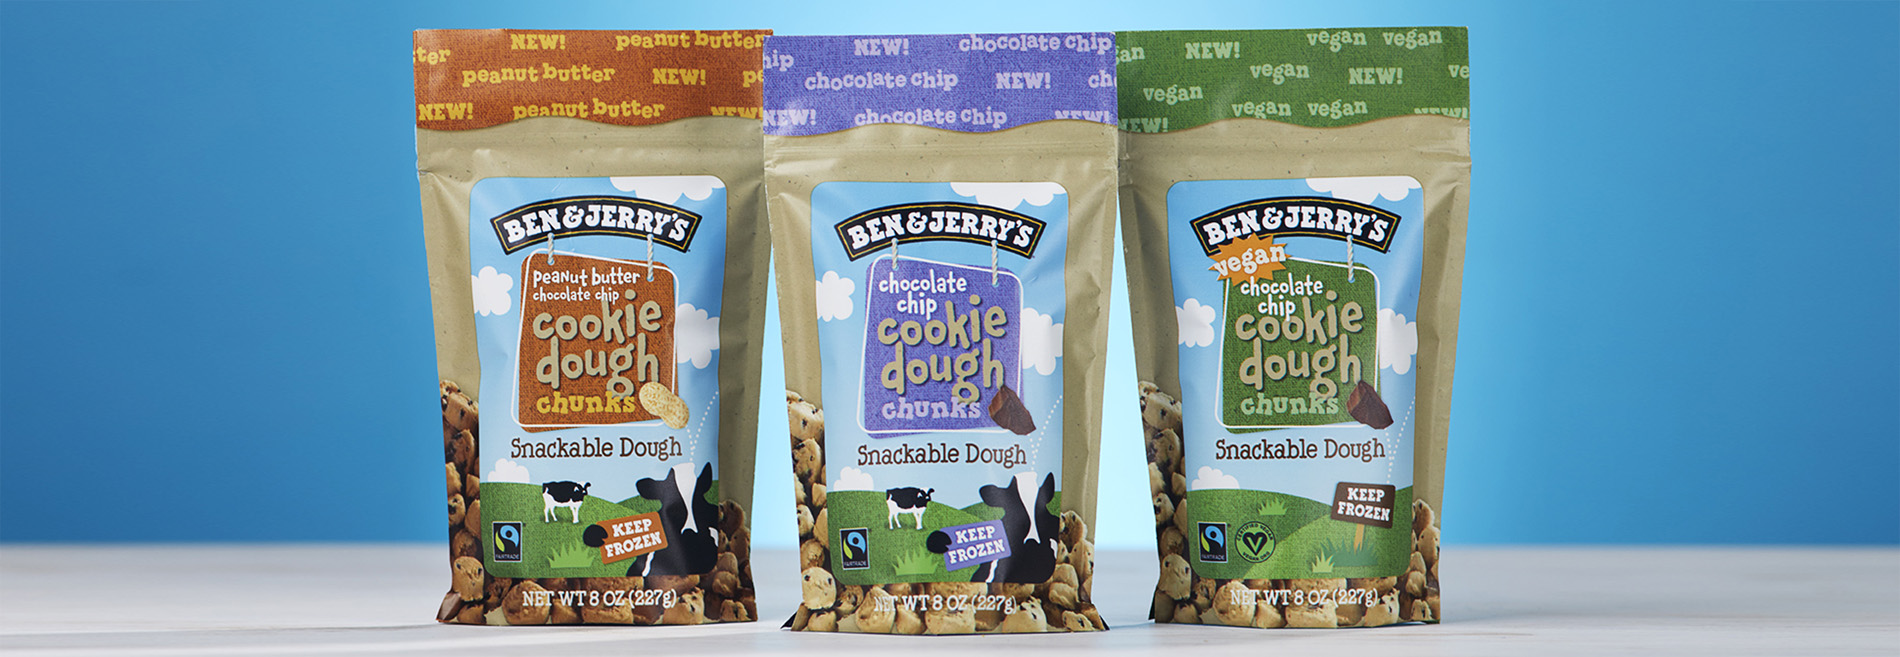 Flavors of Ben & Jerry's new cookie dough chunks